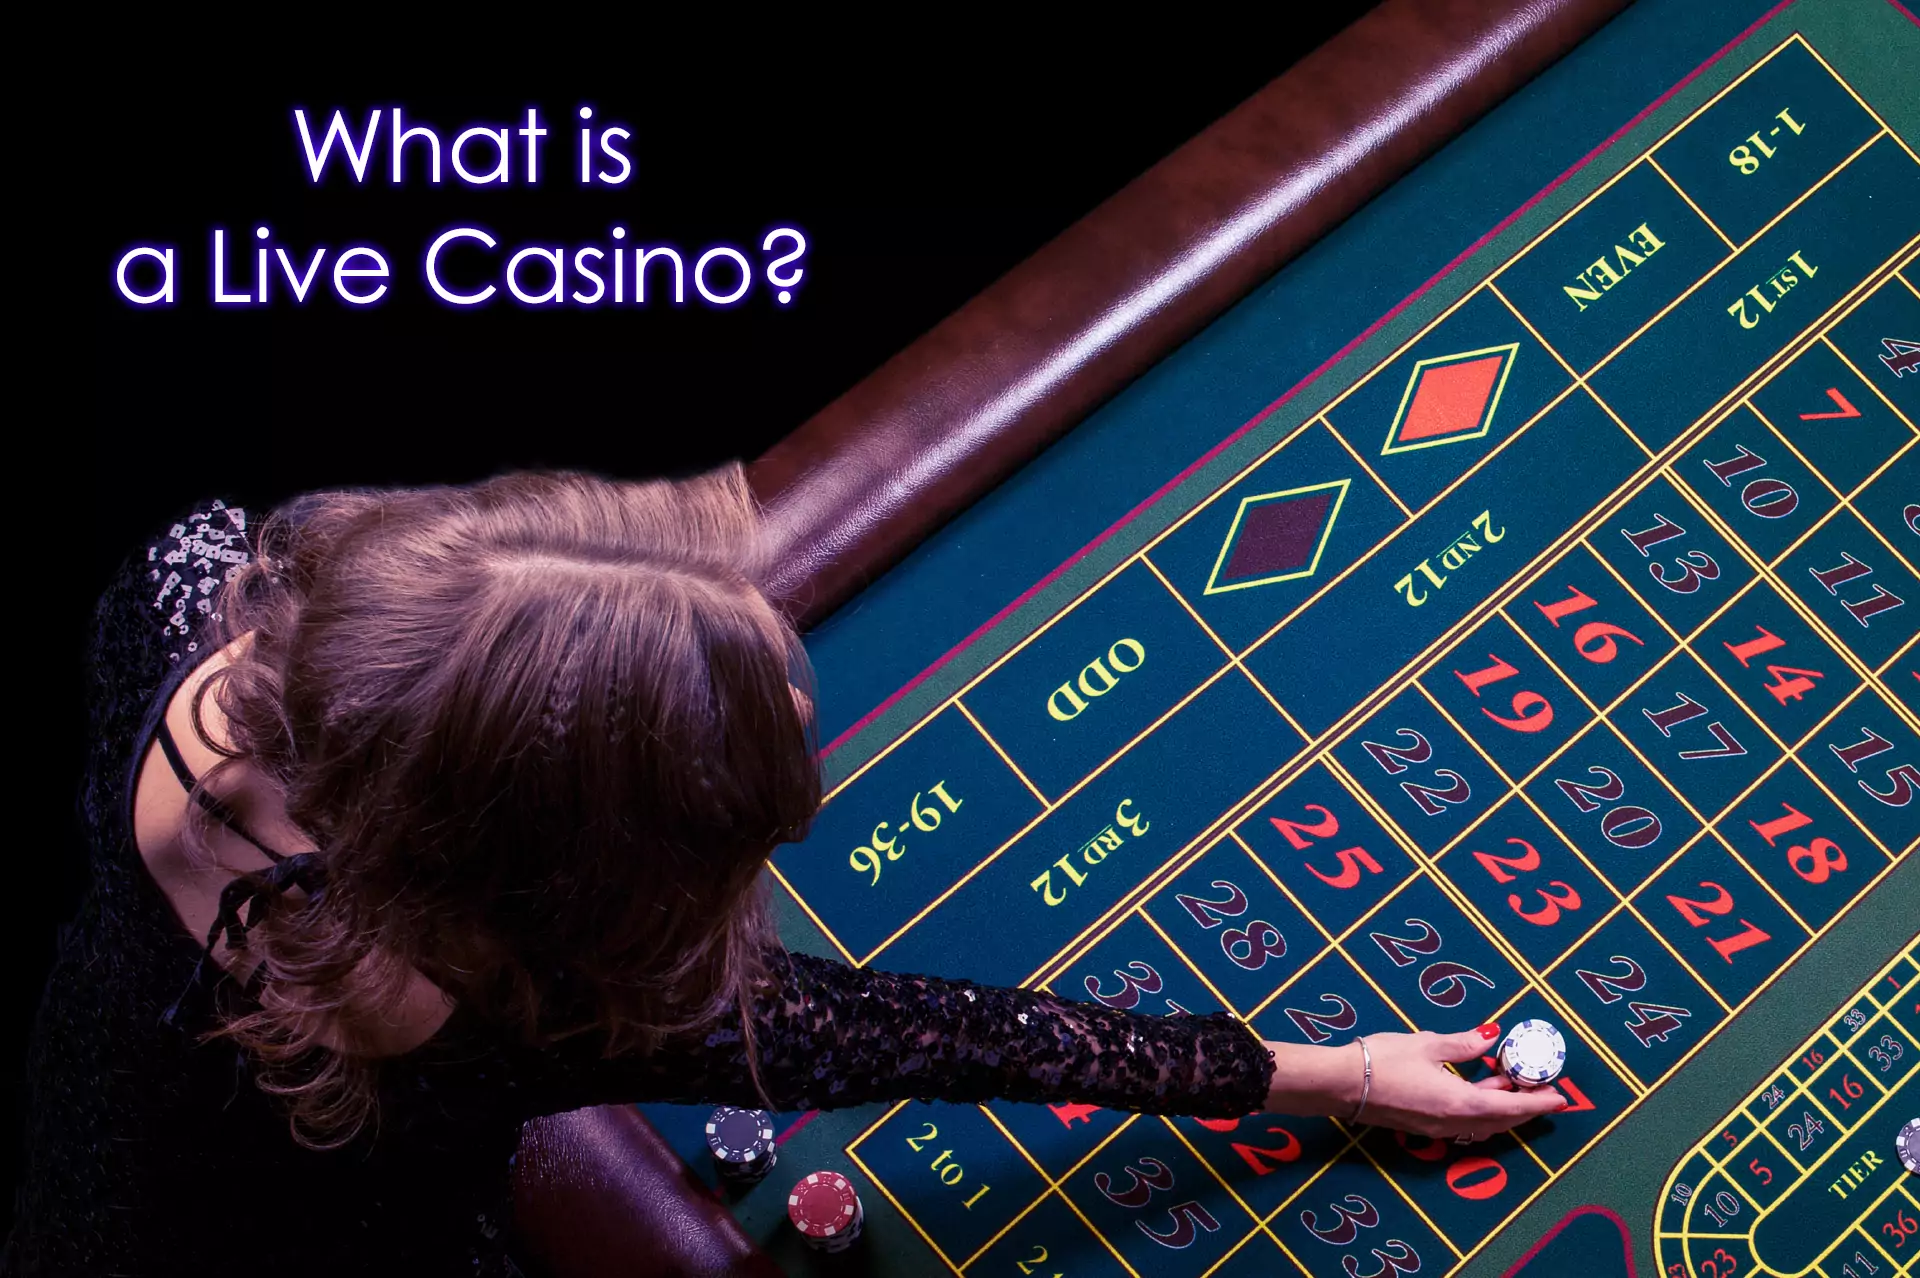 The main advantage of the Live Casino is real dealers who play with you online.